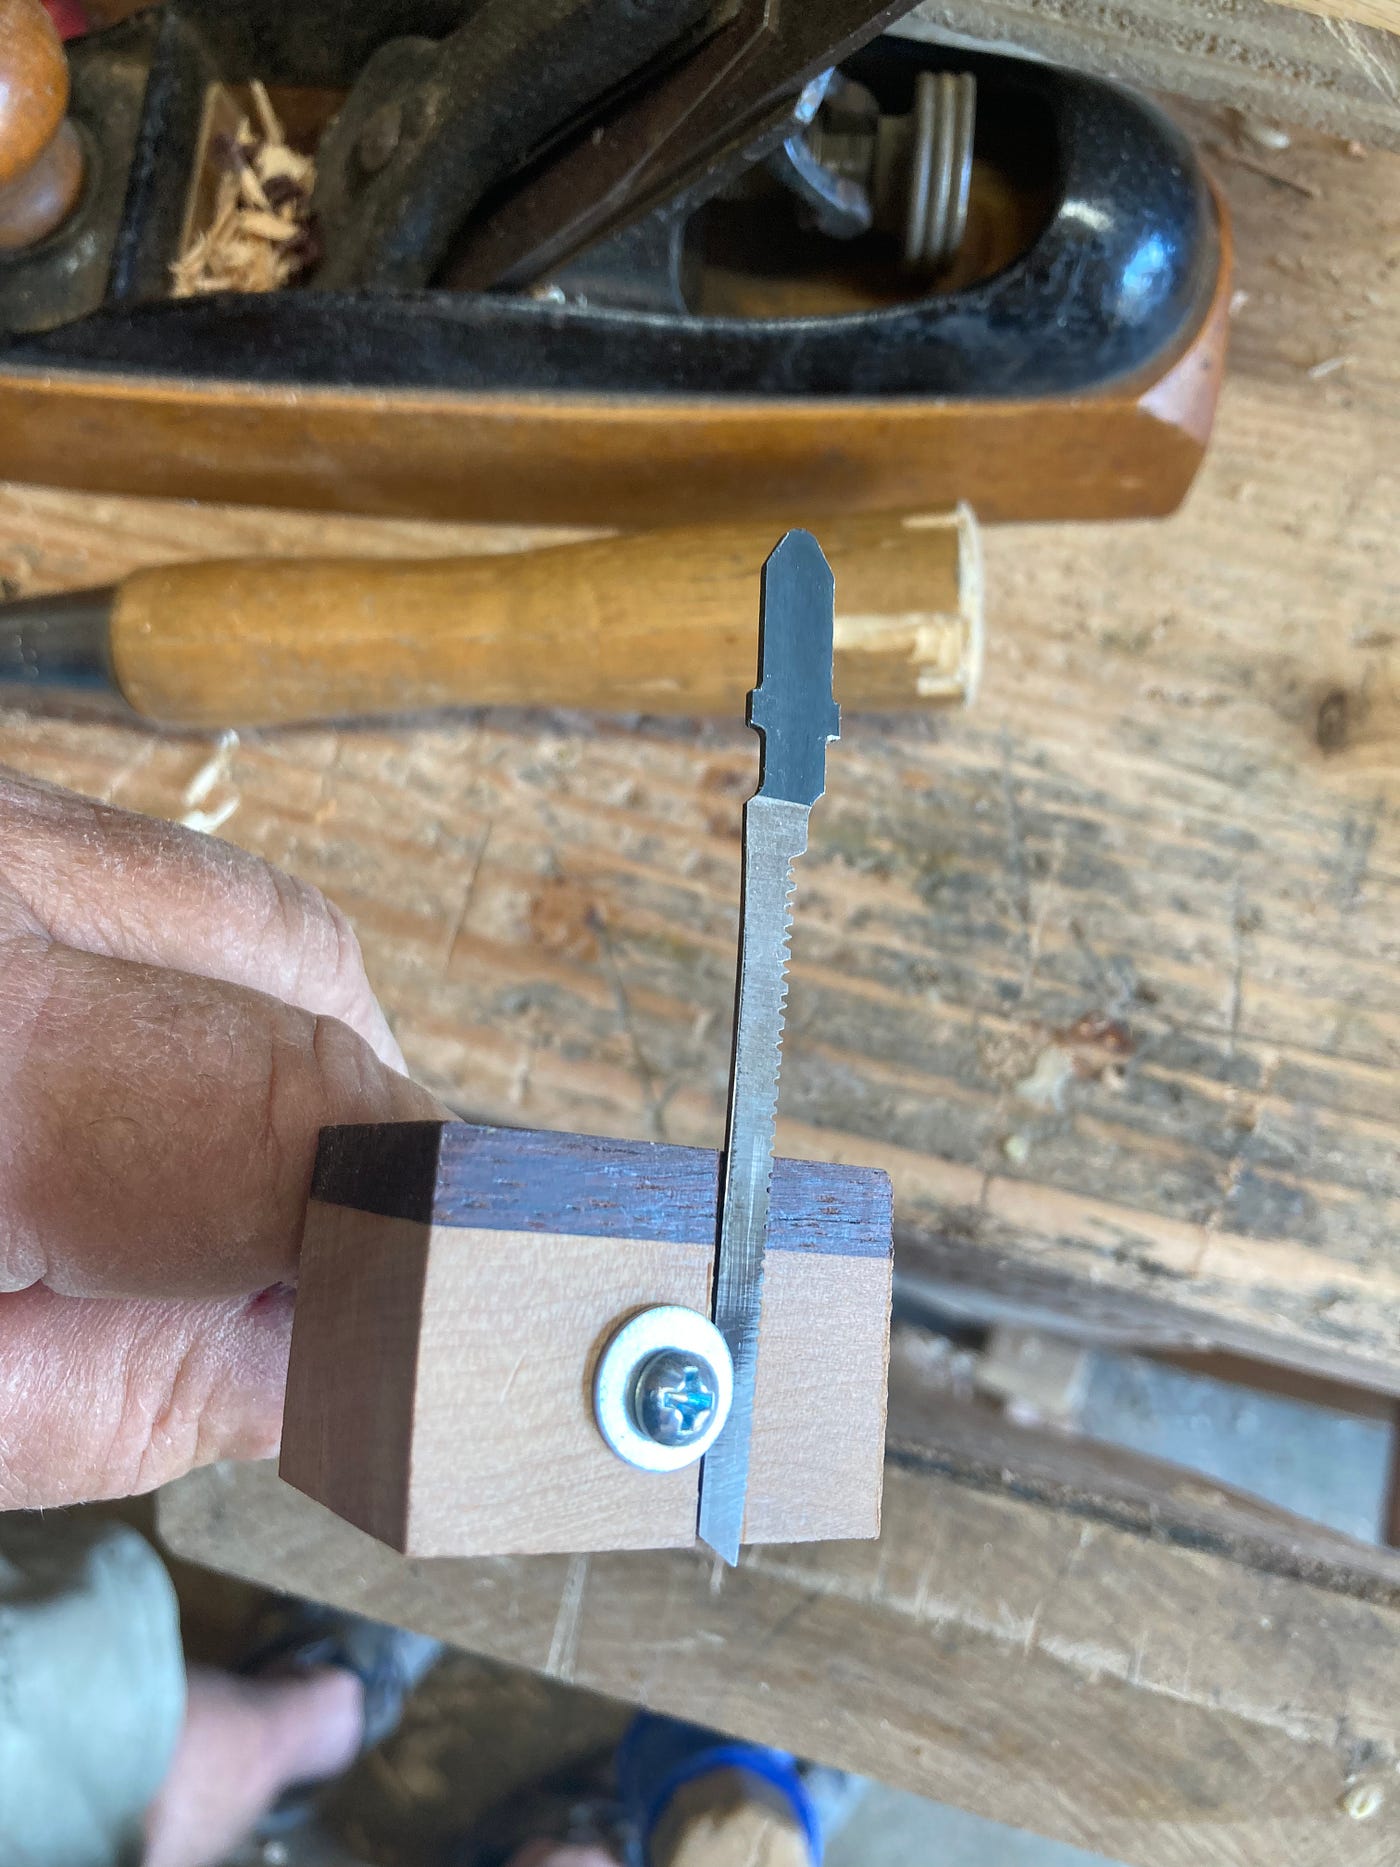 square - Difficulties using a marking knife - Woodworking Stack